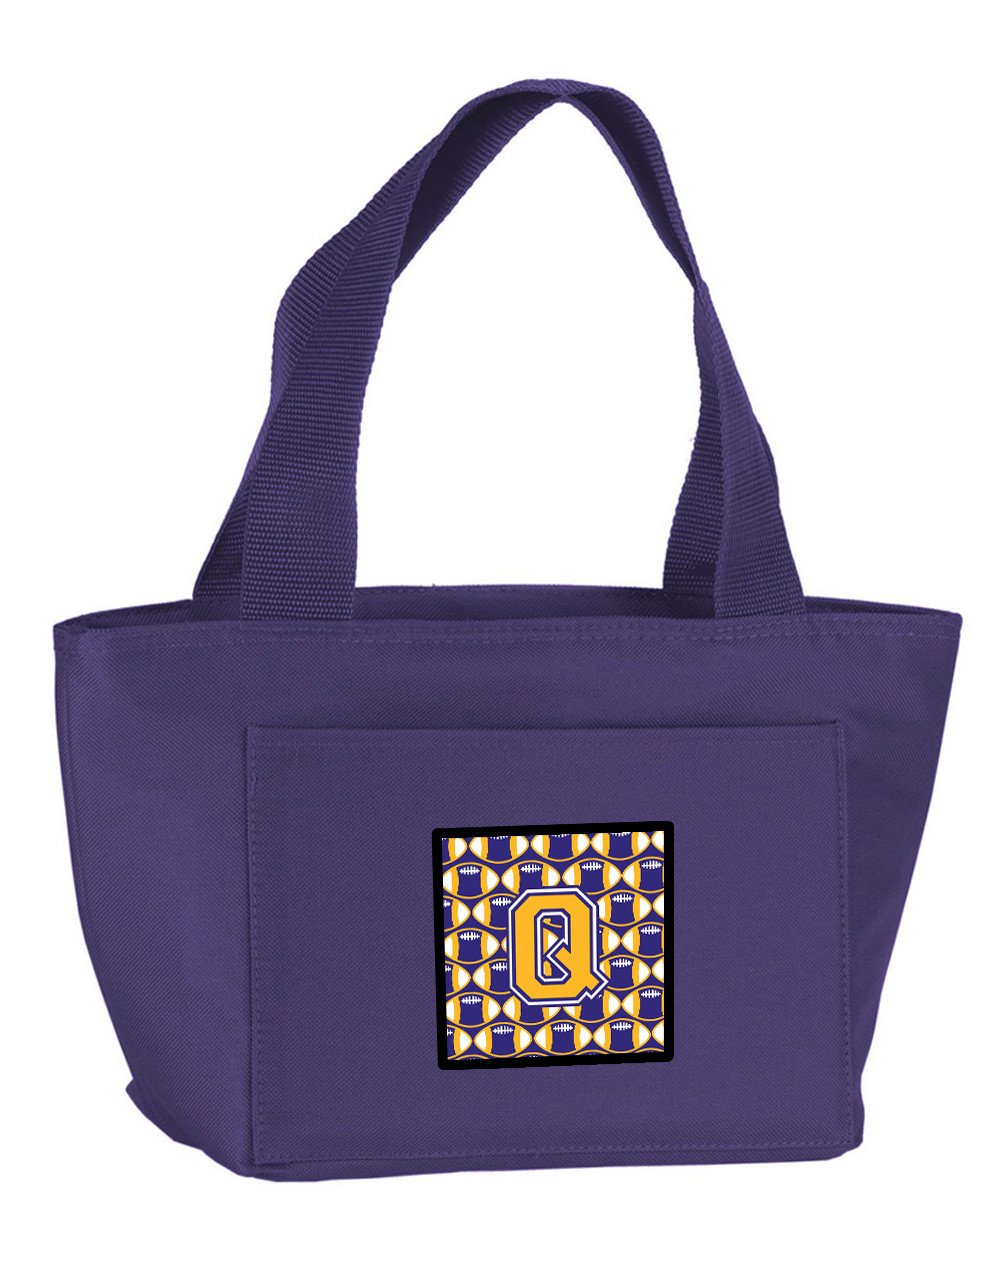 Letter Q Football Purple and Gold Lunch Bag CJ1064-QPR-8808 by Caroline's Treasures